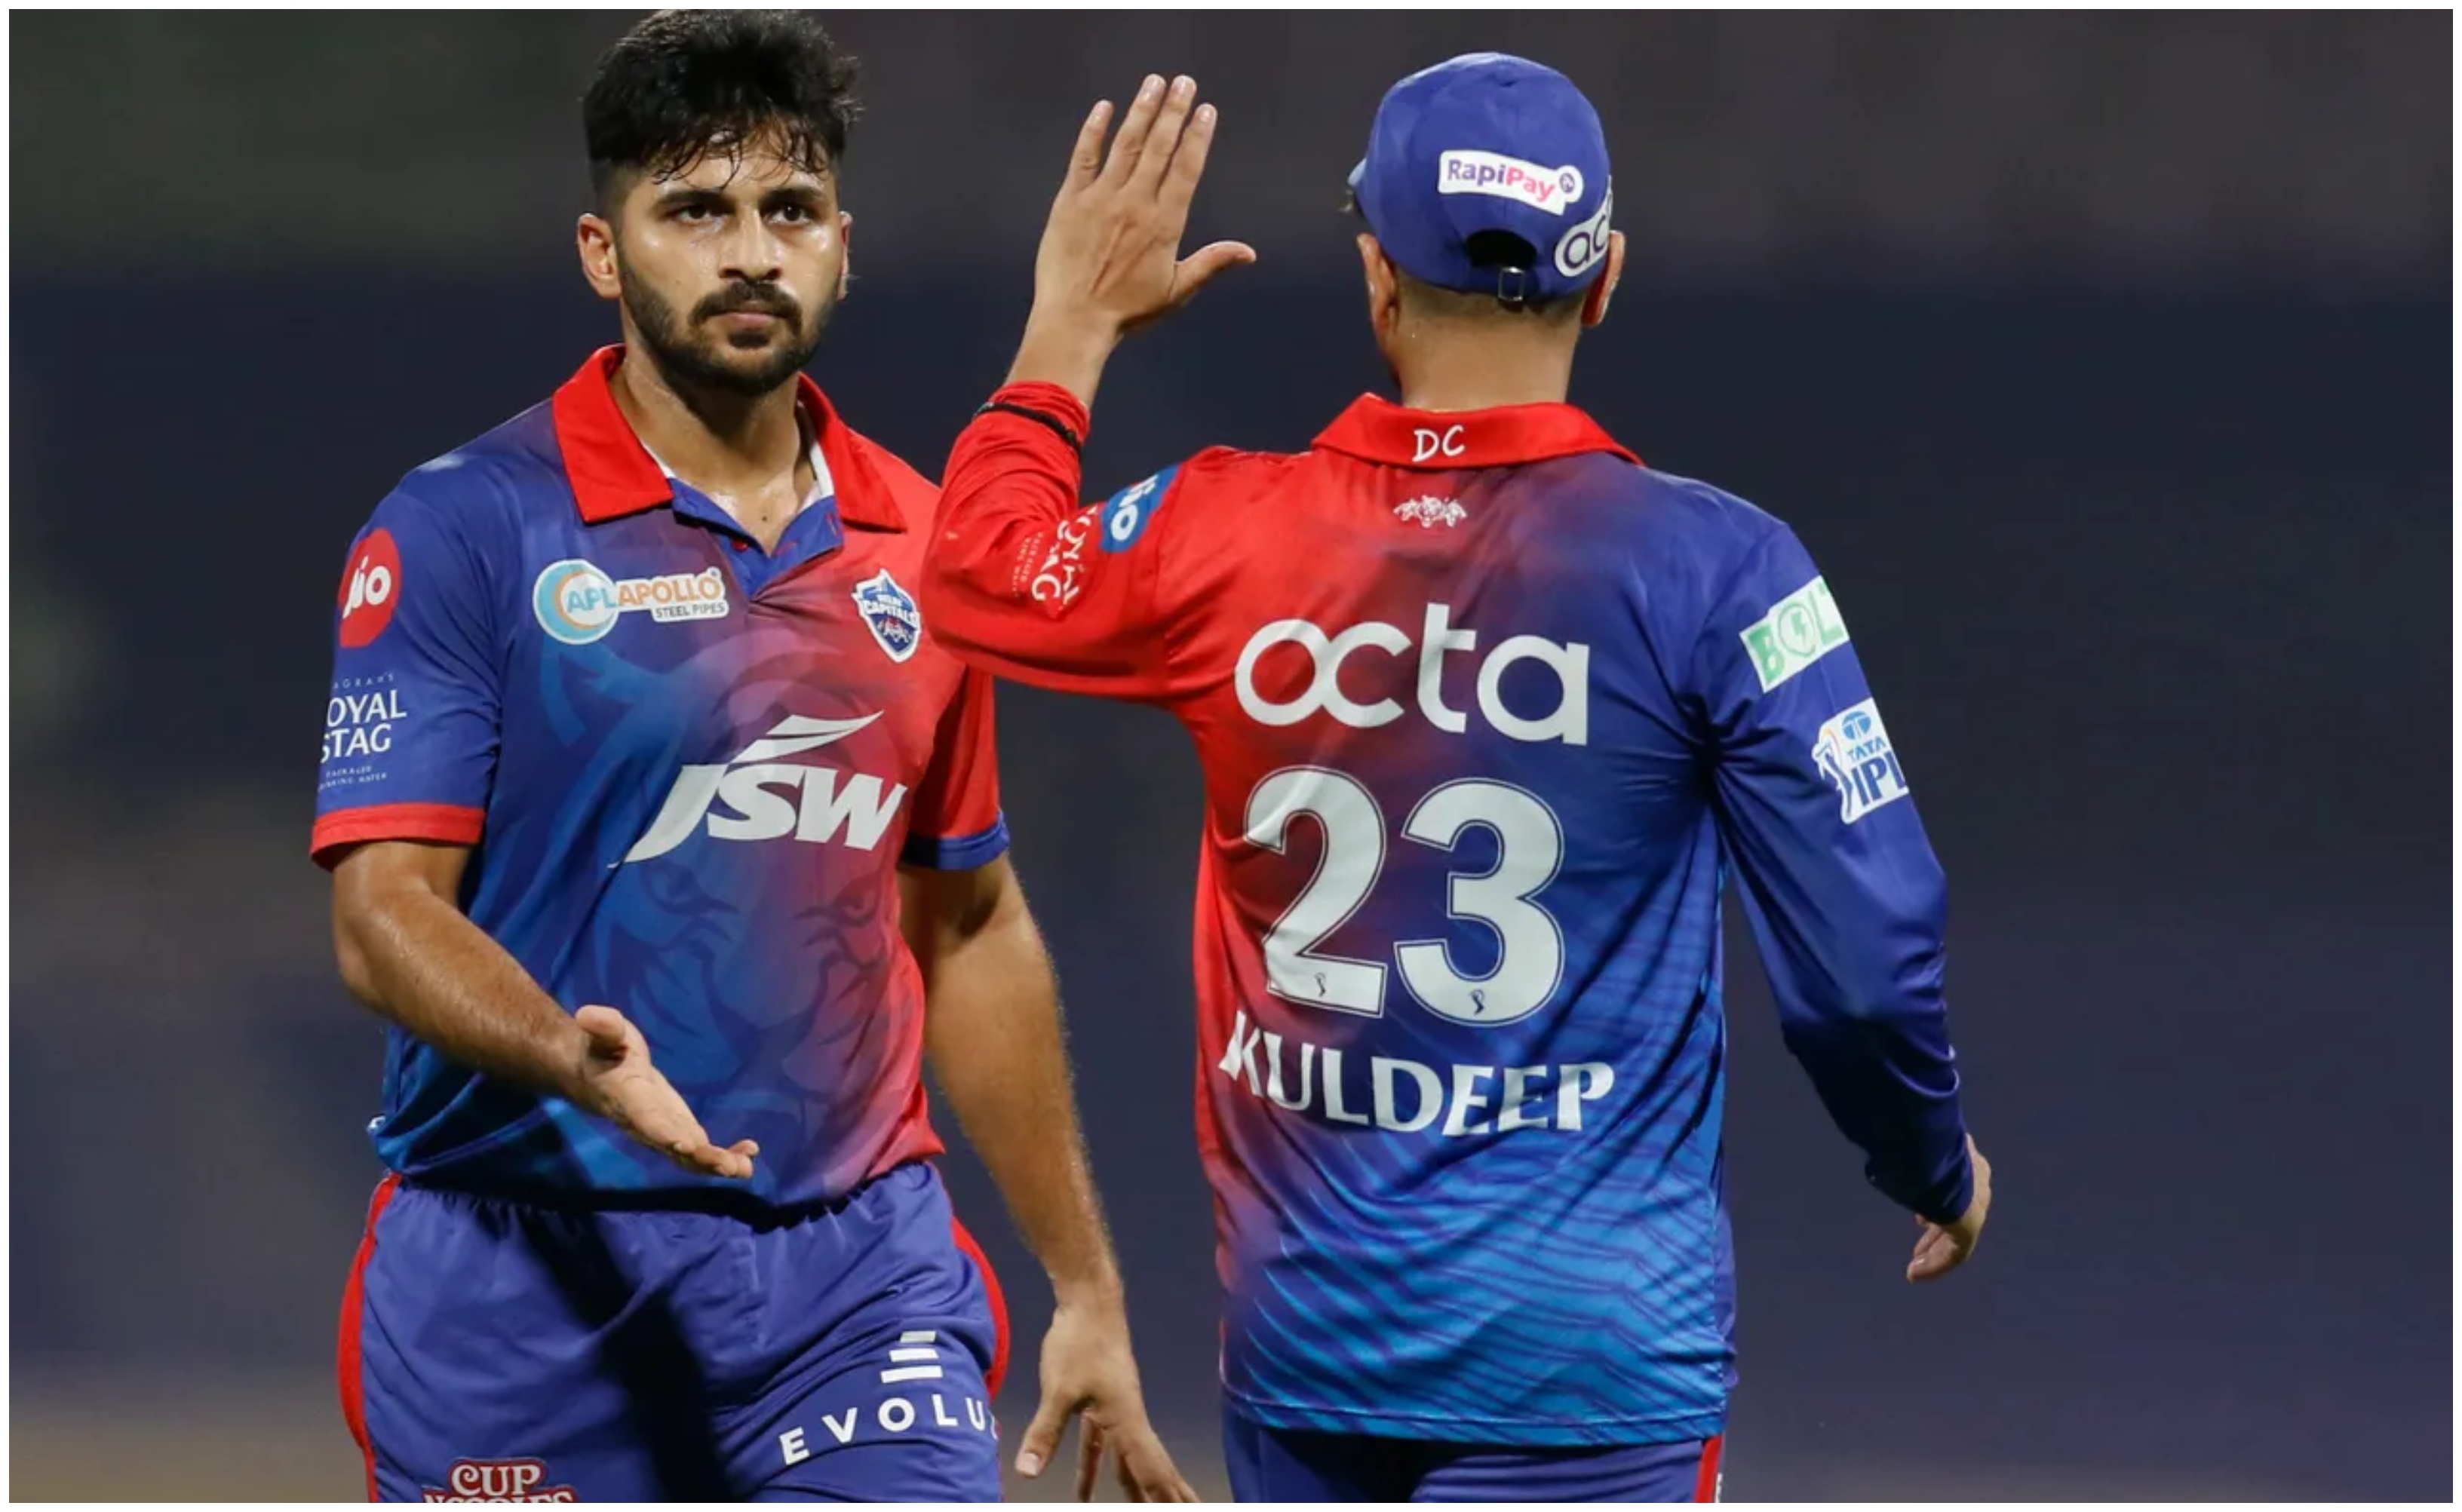 Shardul Thakur starred with the ball in DC's victory | BCCI/IPL